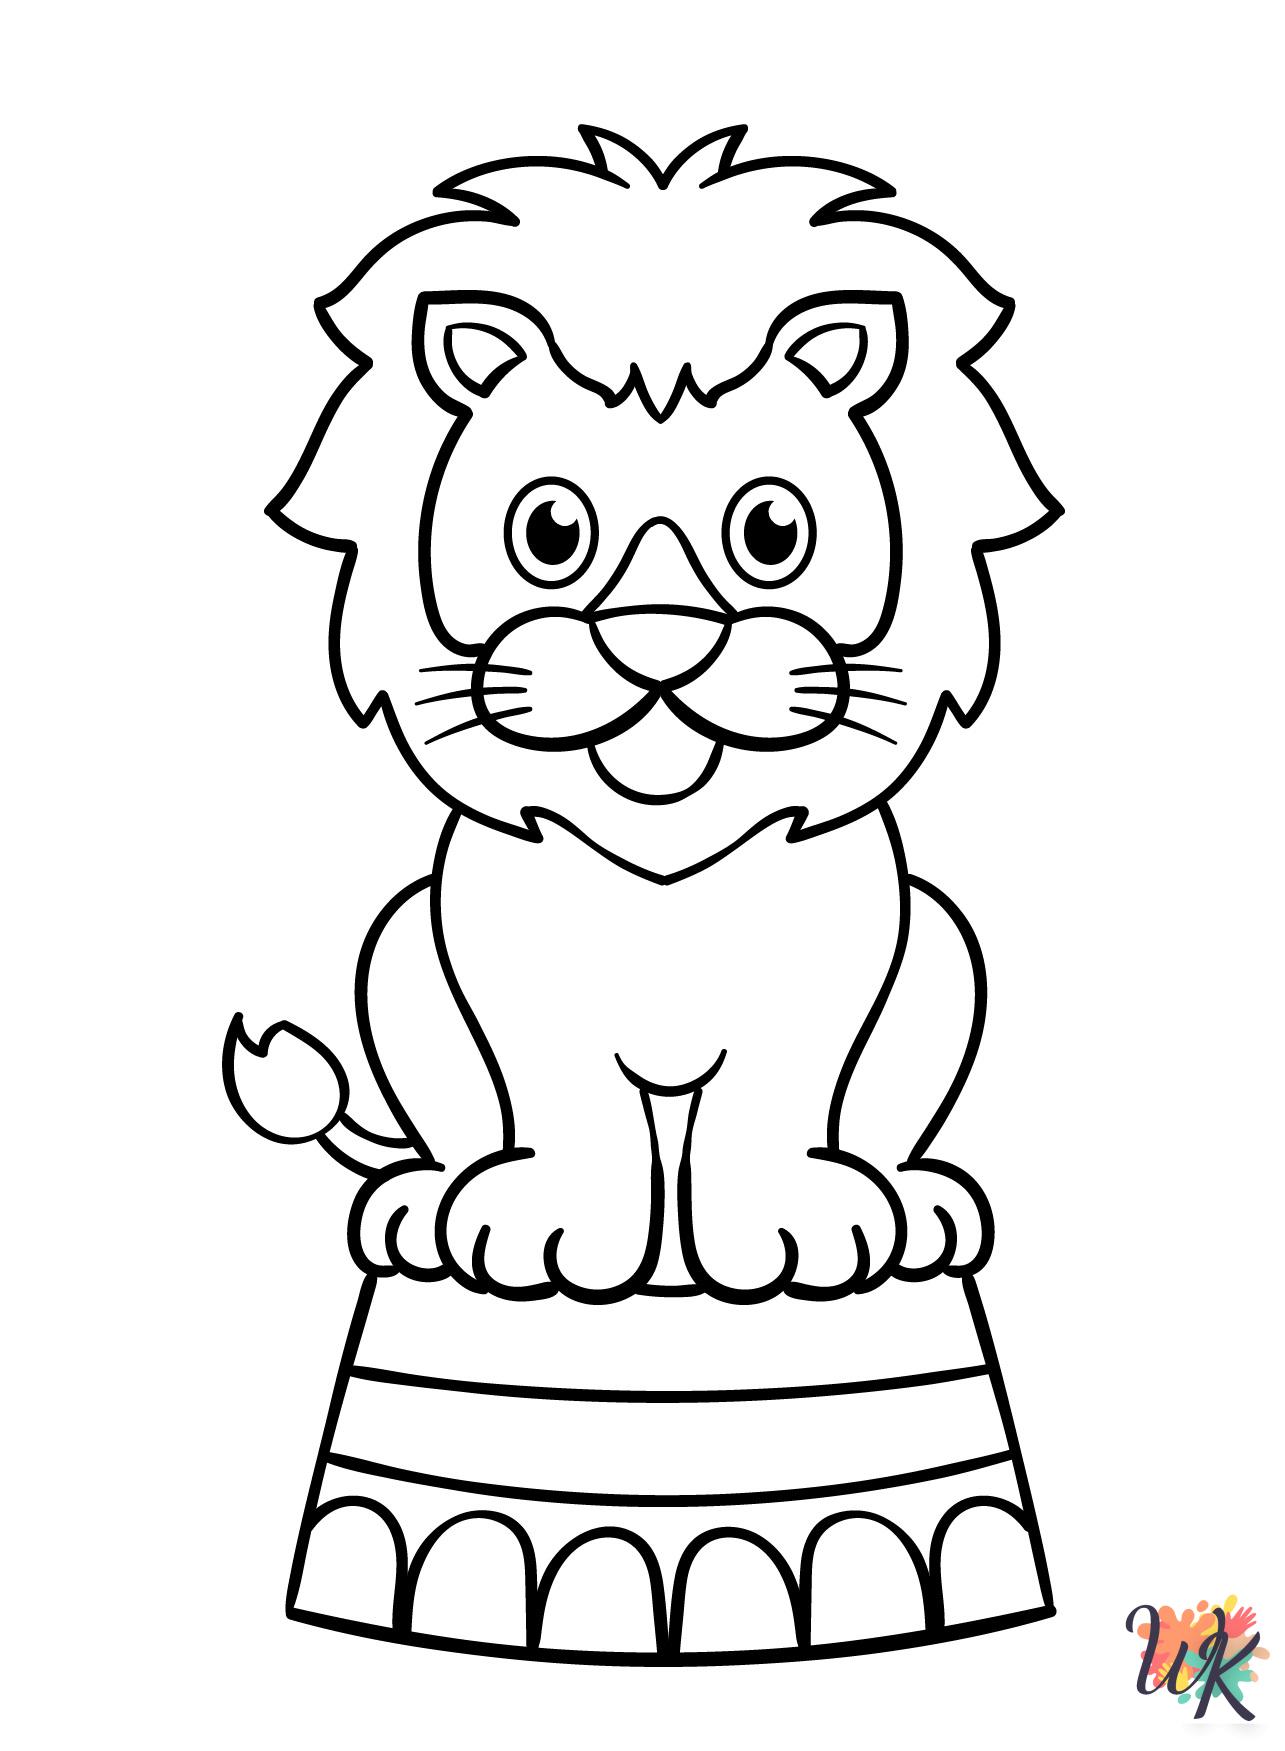 merry Circus coloring pages